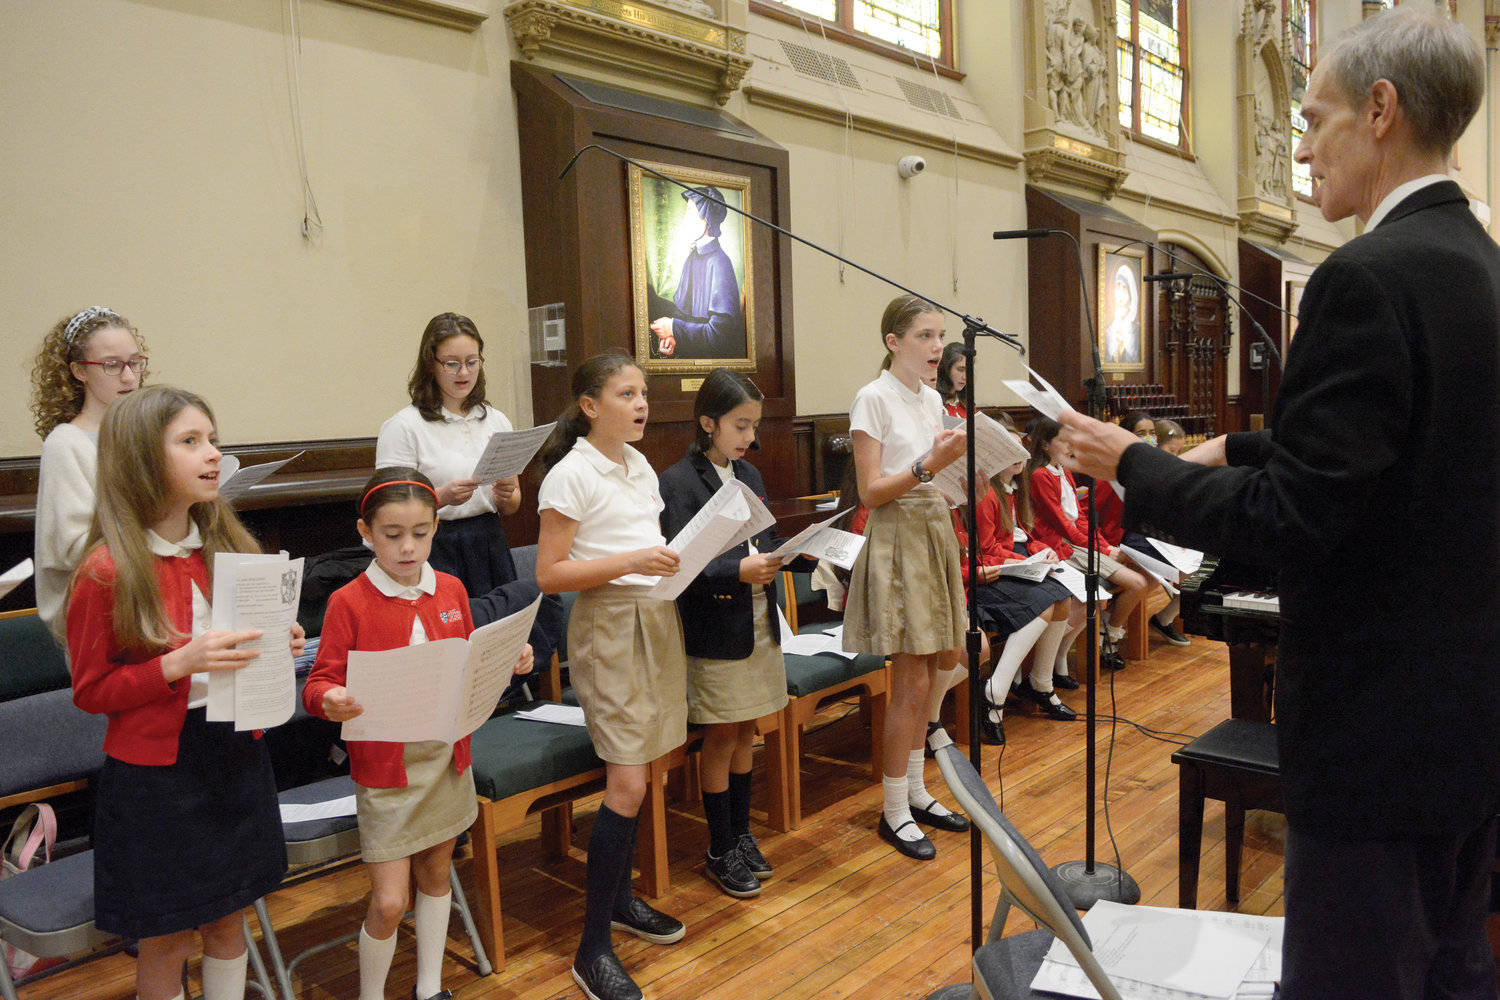 Choristers from the St. Stephen of Hungary School choir lift their voices in song.